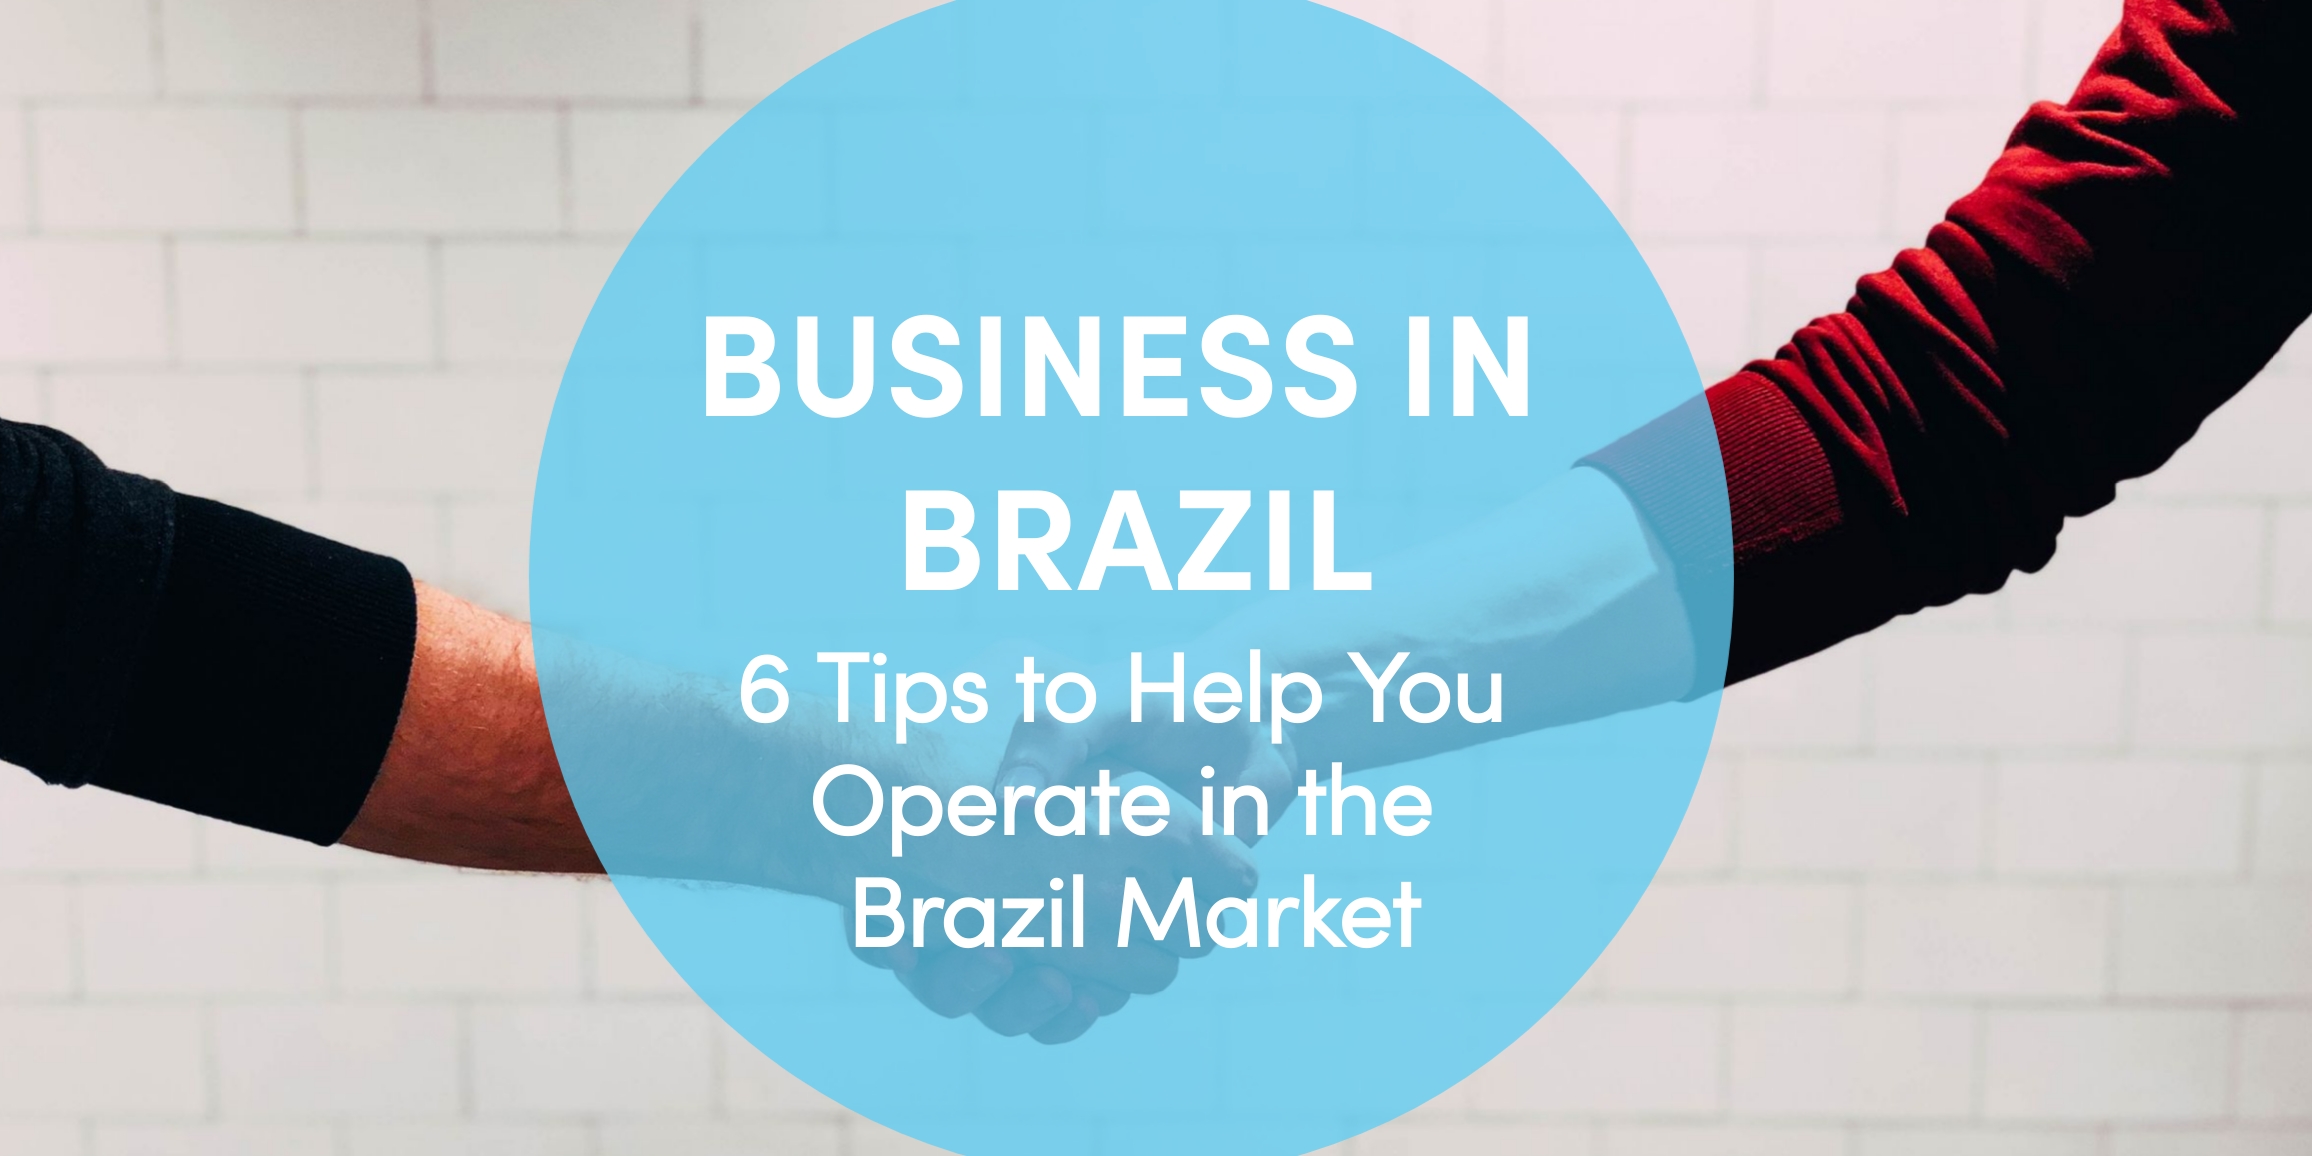 Some highlights from the recent article about the  business in  Brazil